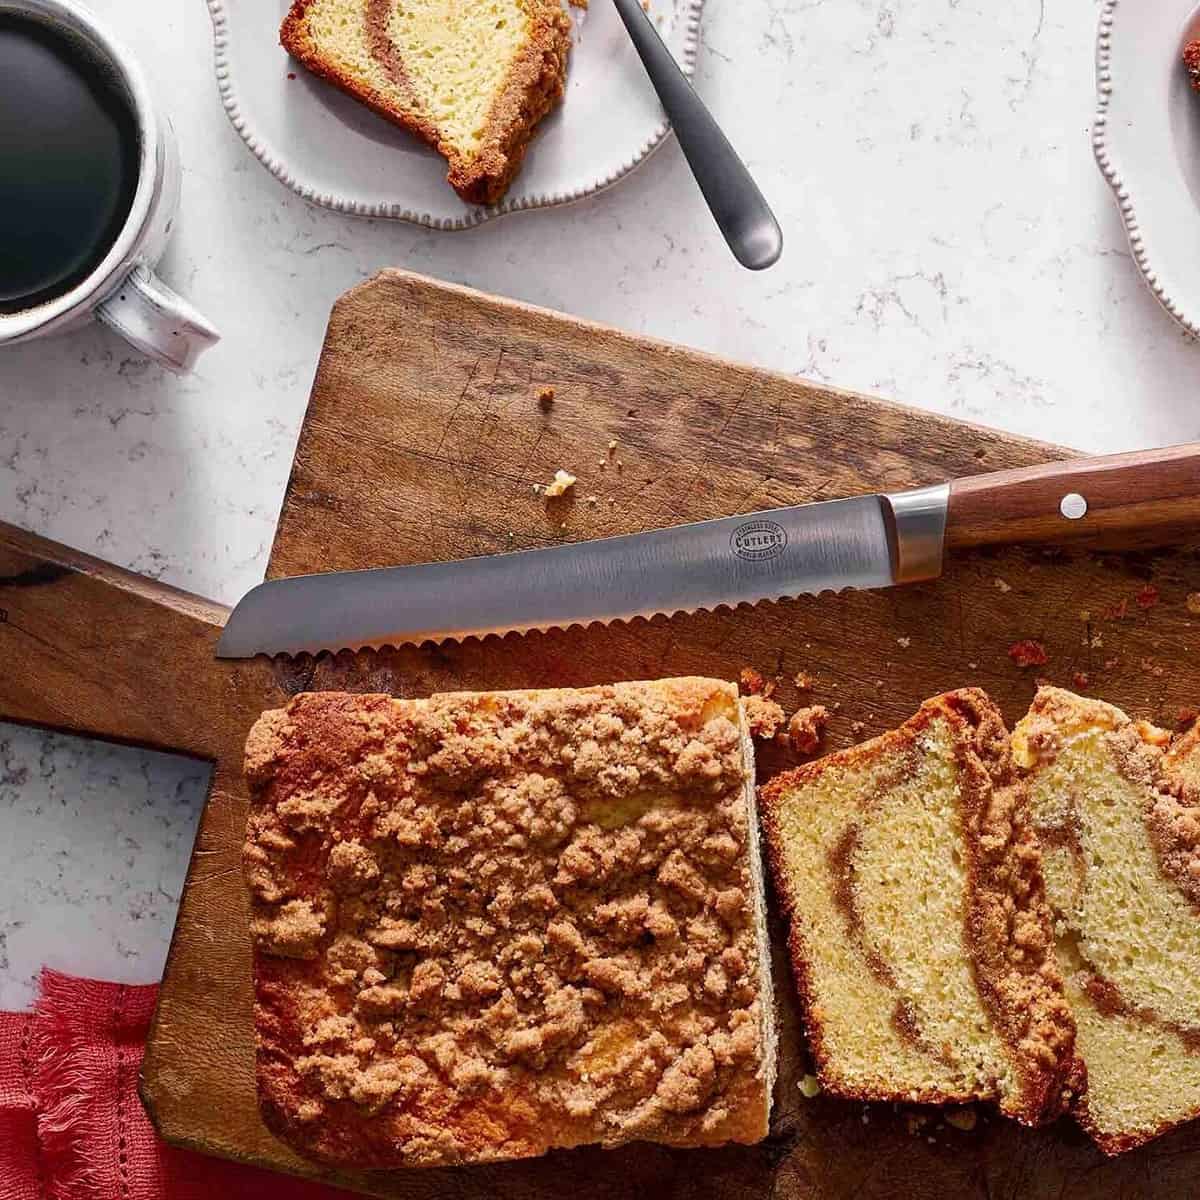  This Starbucks coffee cake recipe will satisfy your cravings for something sweet and comforting.